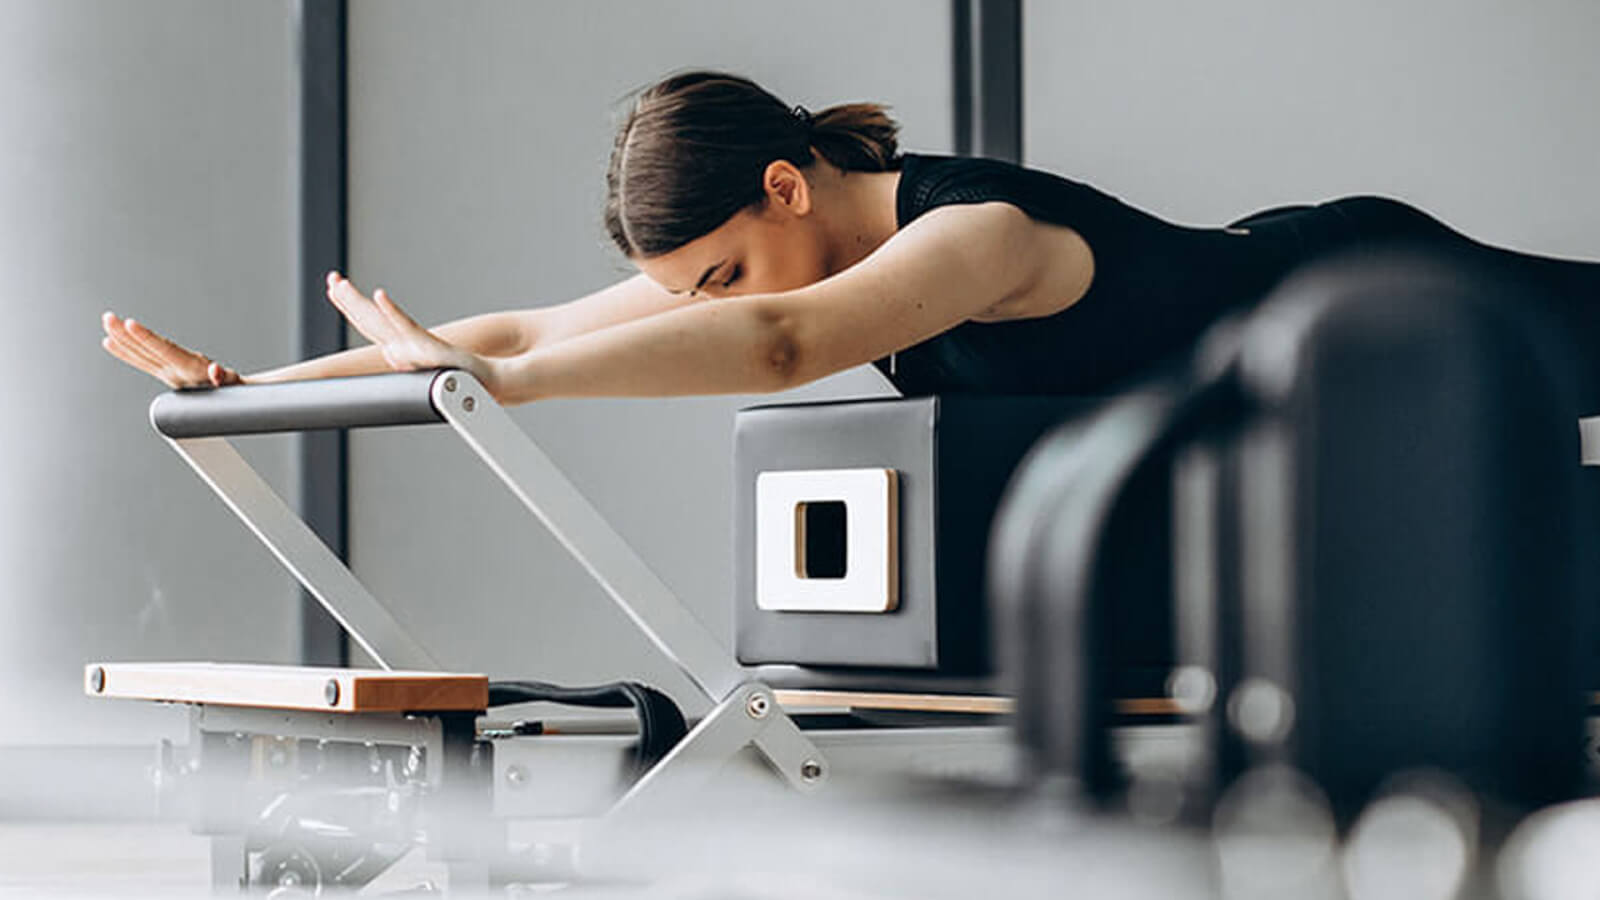 How to Setup your STOTT PILATES Chair 